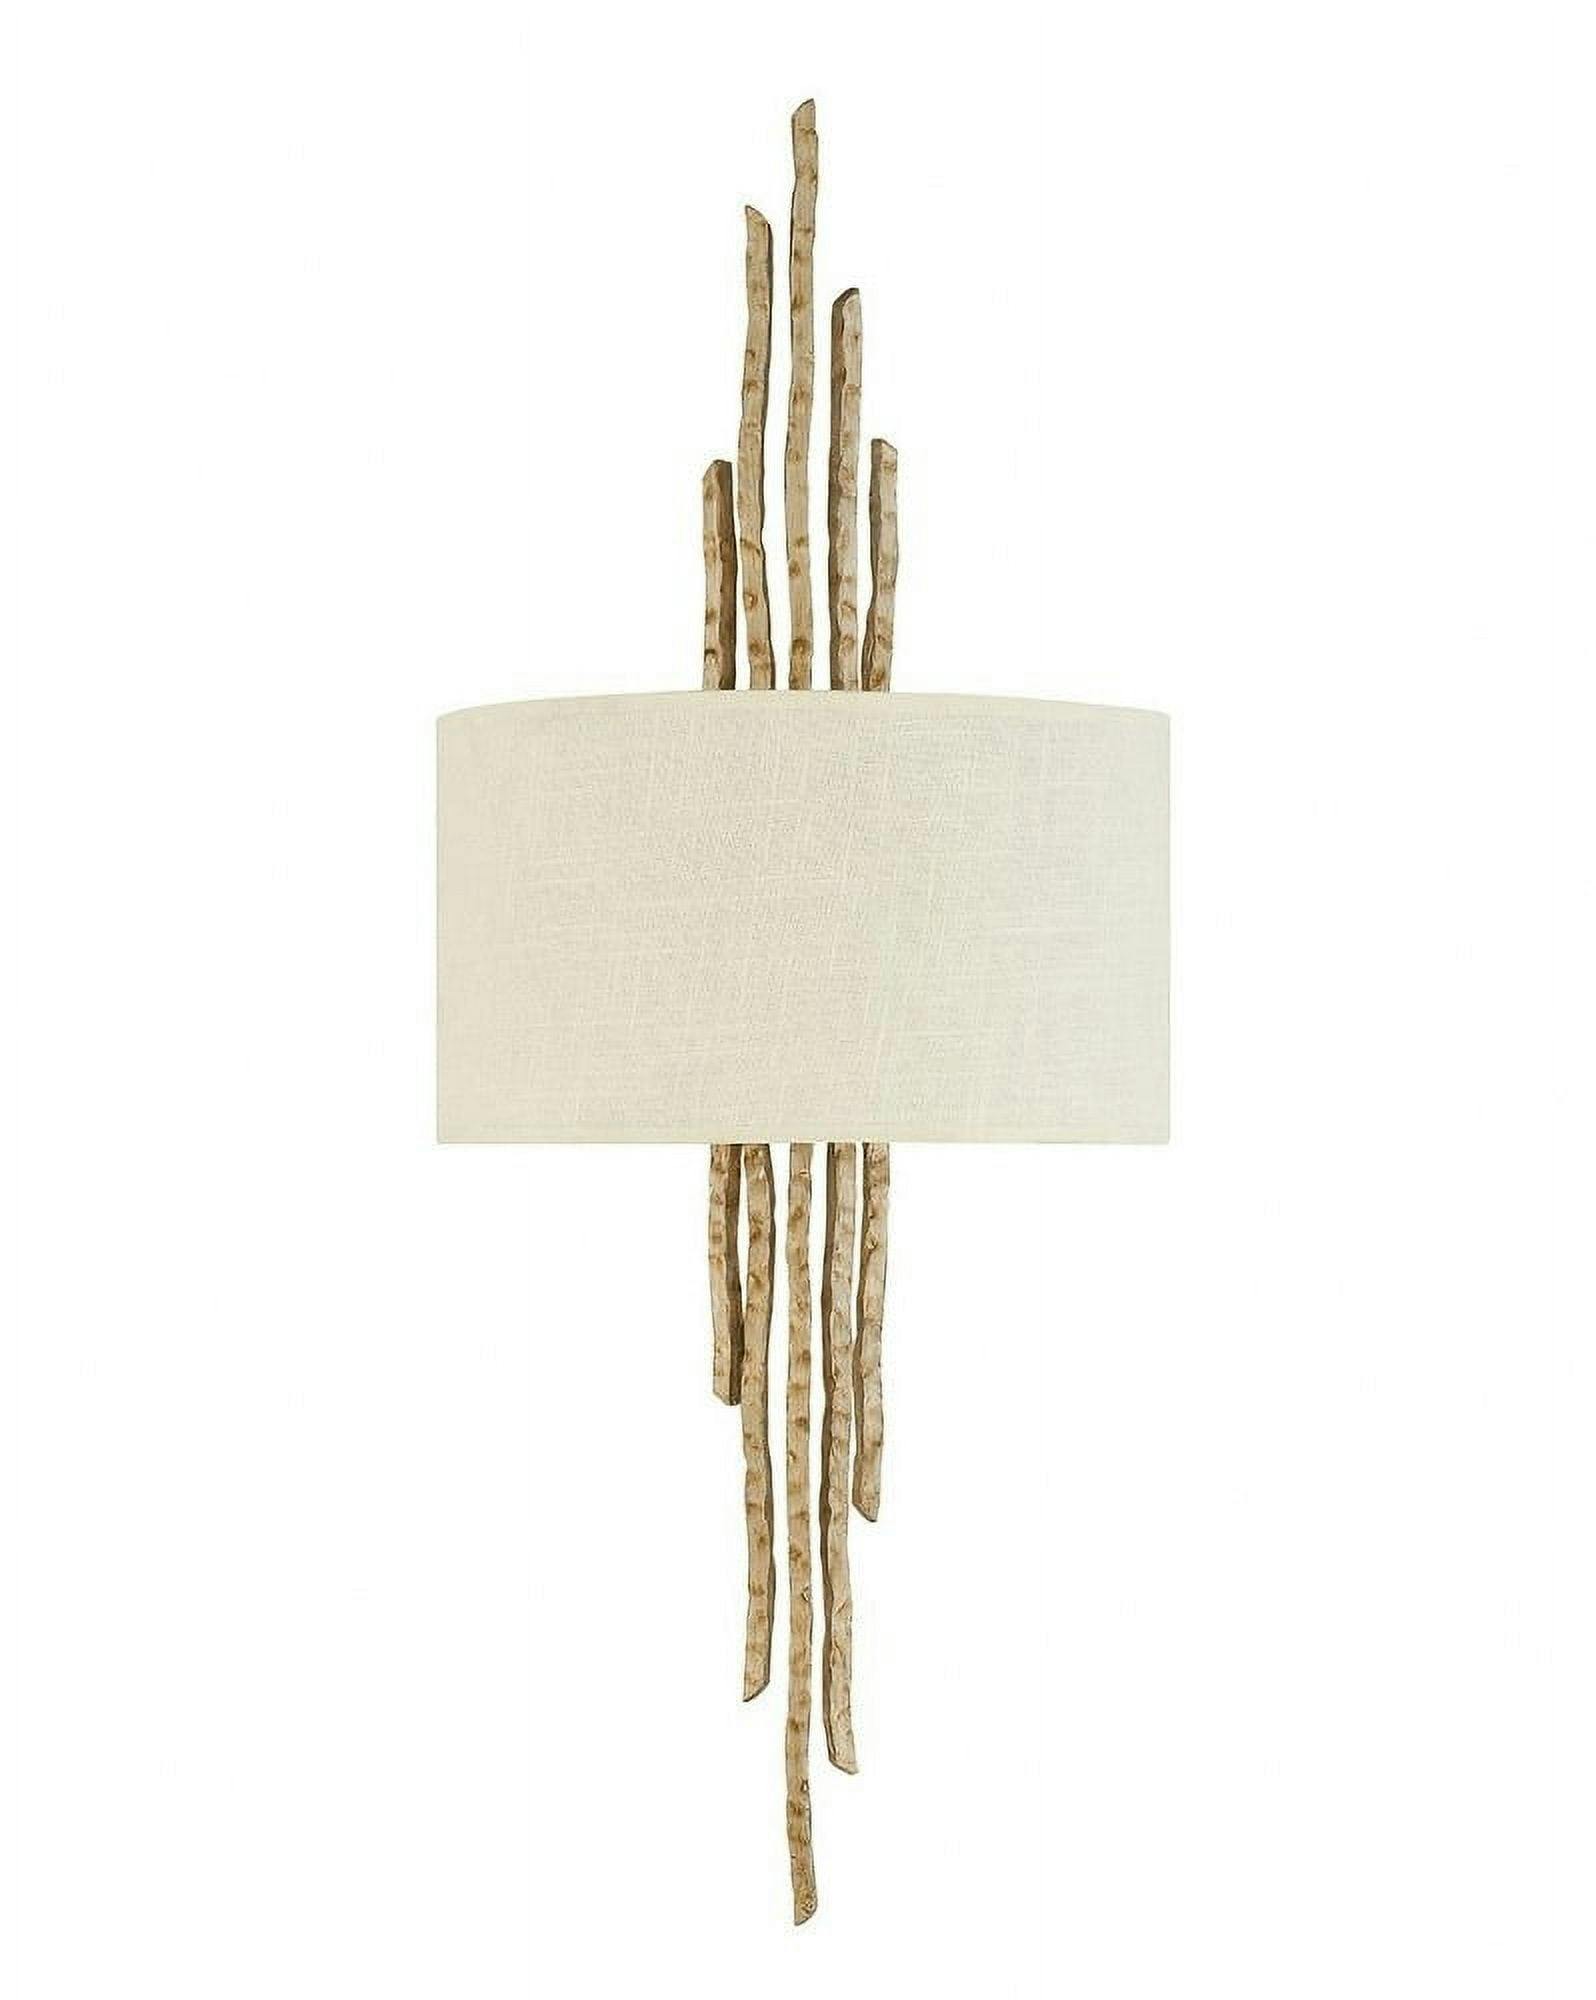 Champagne Gold Hand-Hammered 2-Light Wall Sconce with Linen Shade